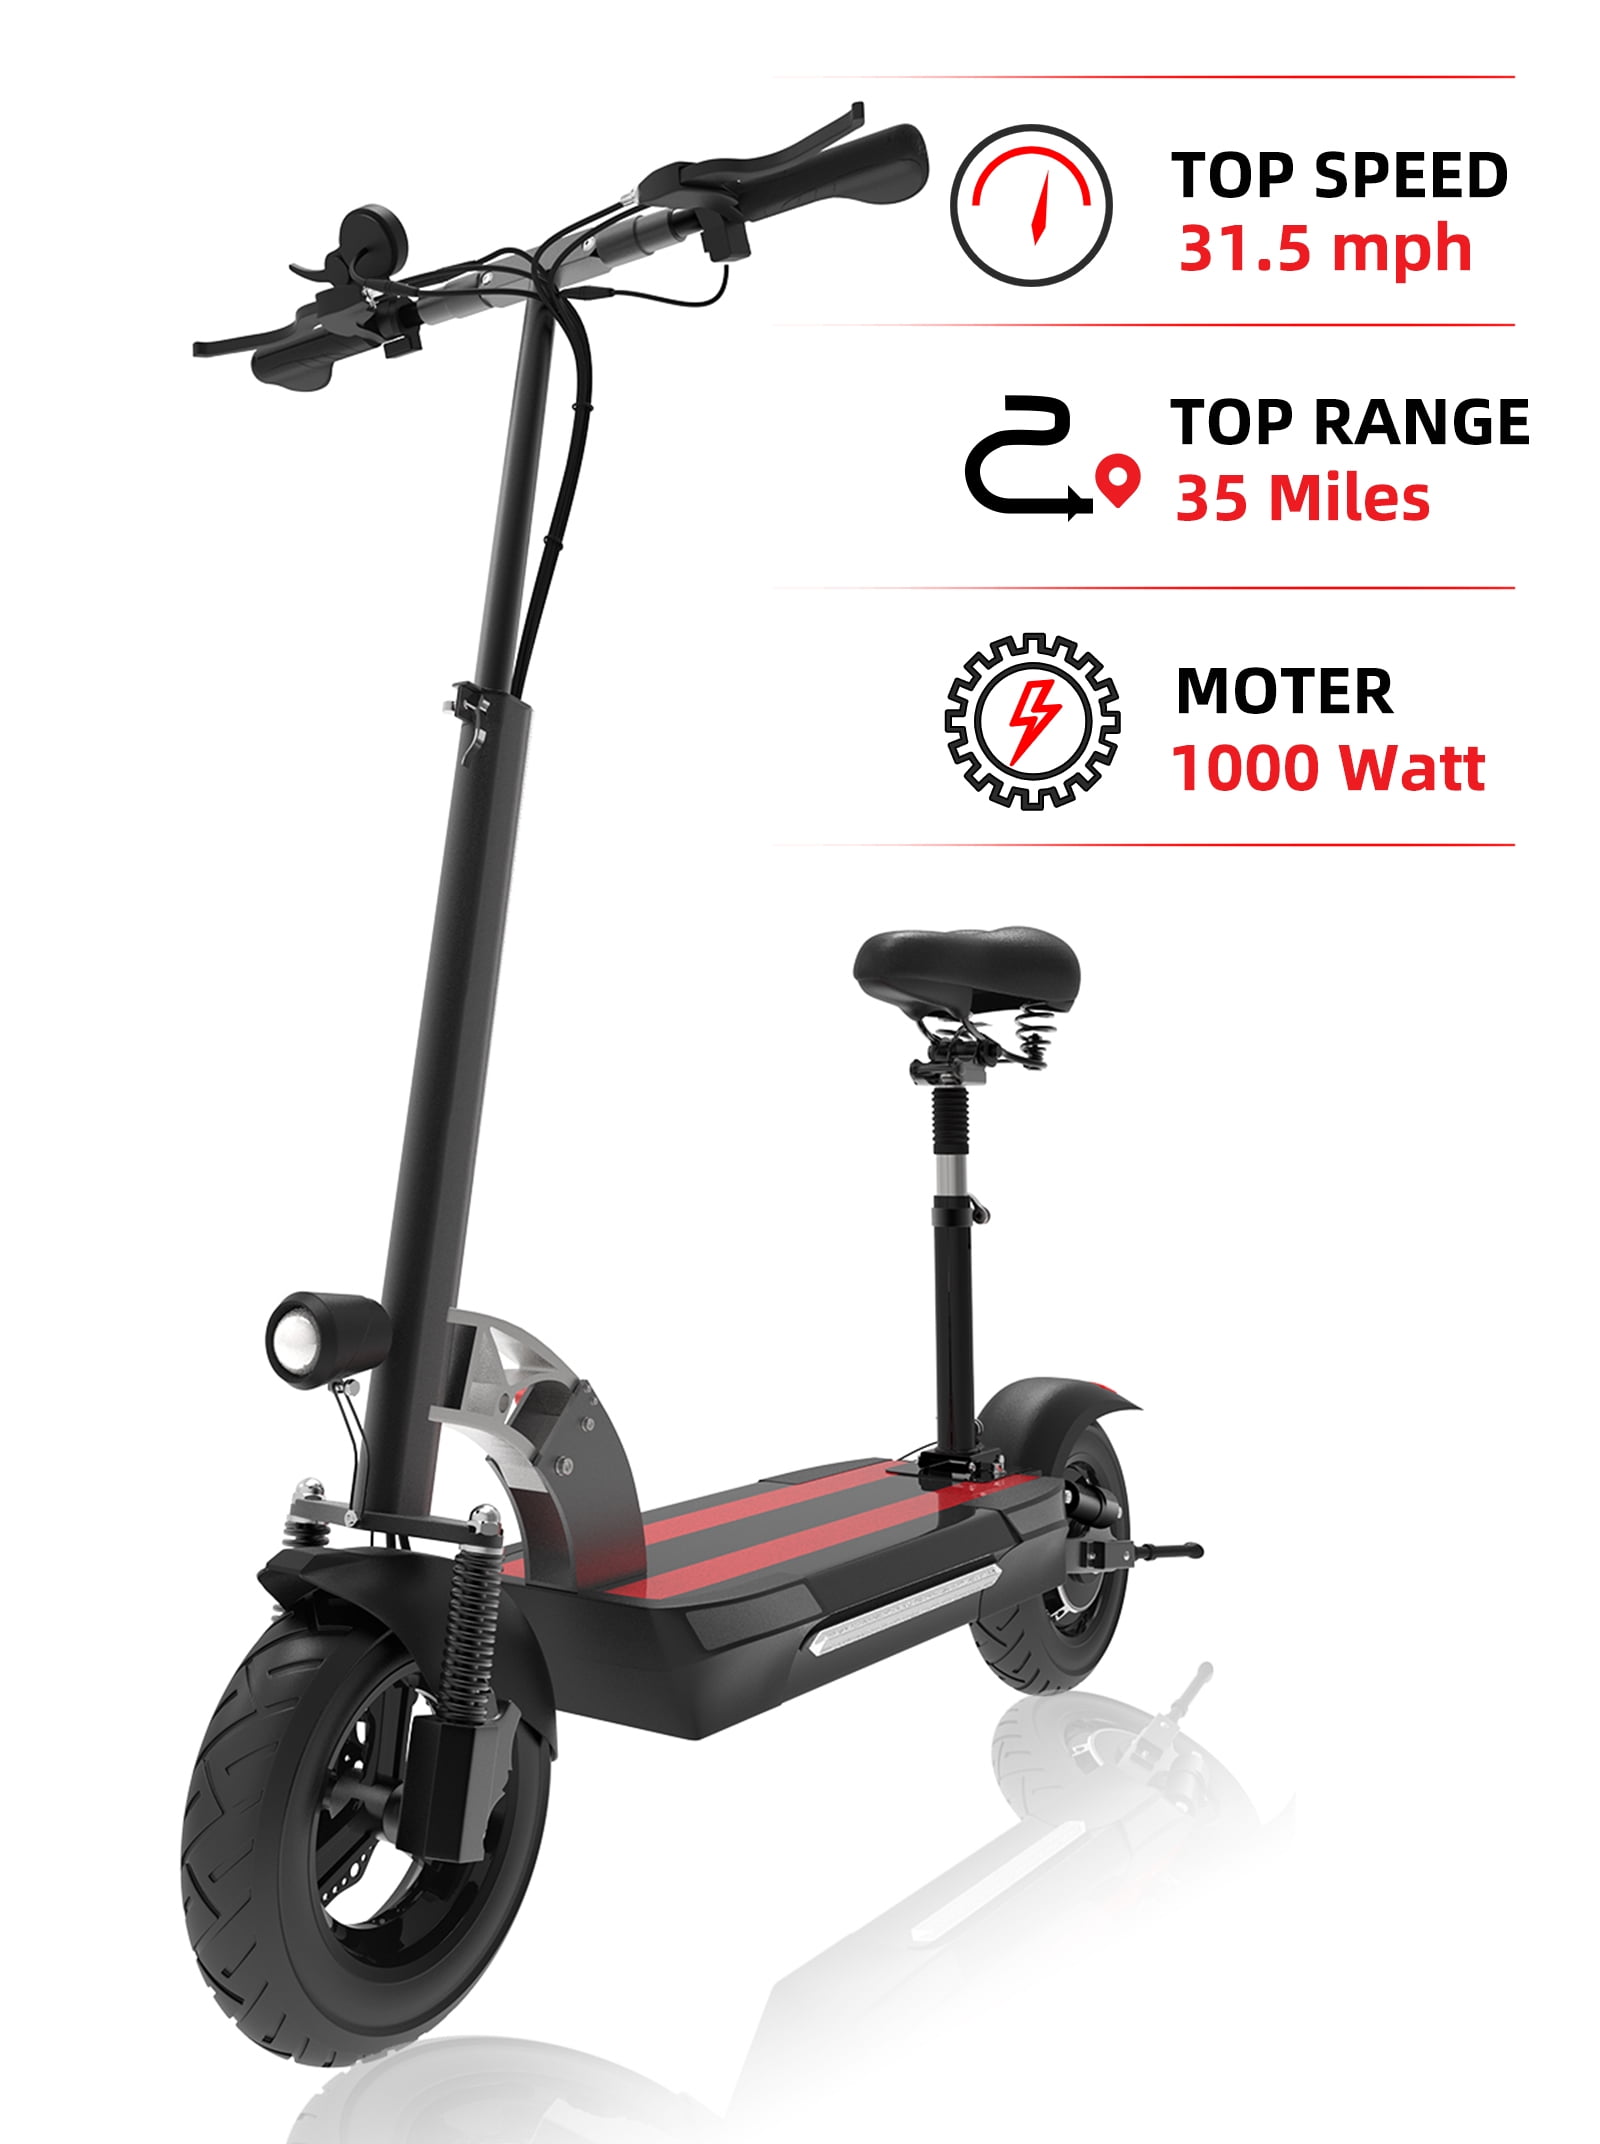 JUEXING Foldable Electric Scooter, 35 Miles Long Range, 1000W Motor 31.5 MPH,  Commuter E Scooter with Seat 